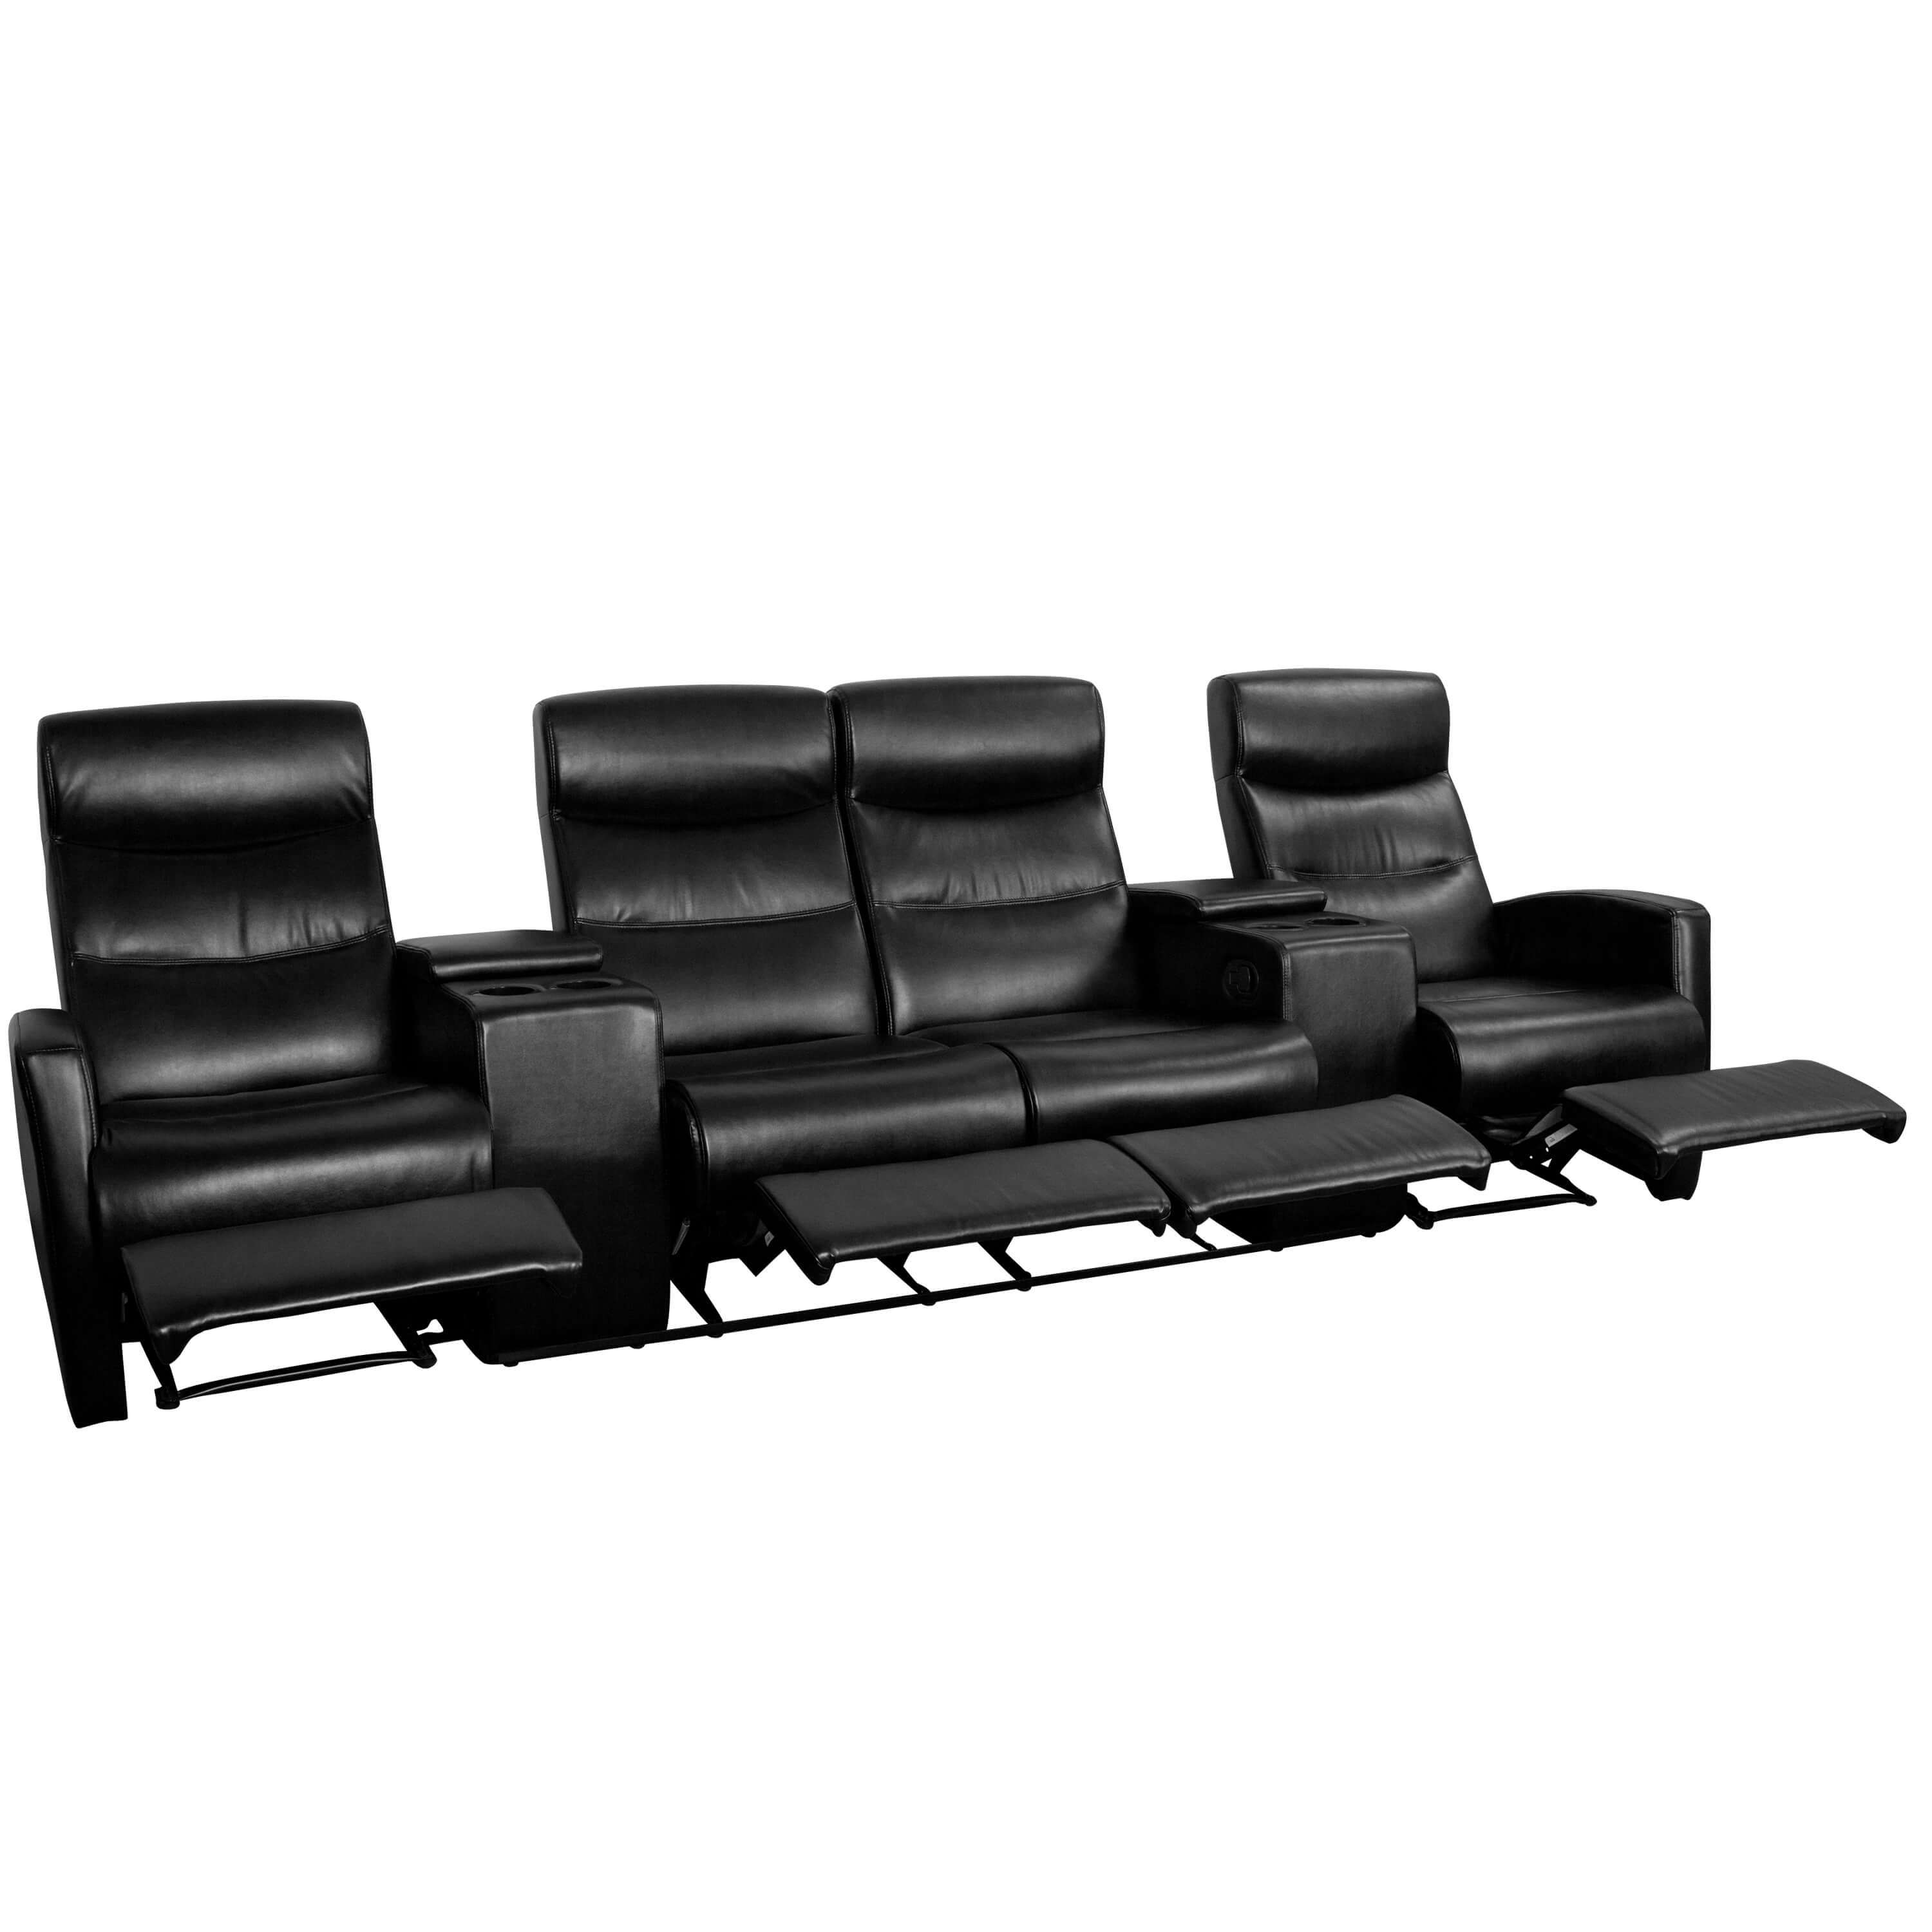 4 seater recliner sofa reclined view